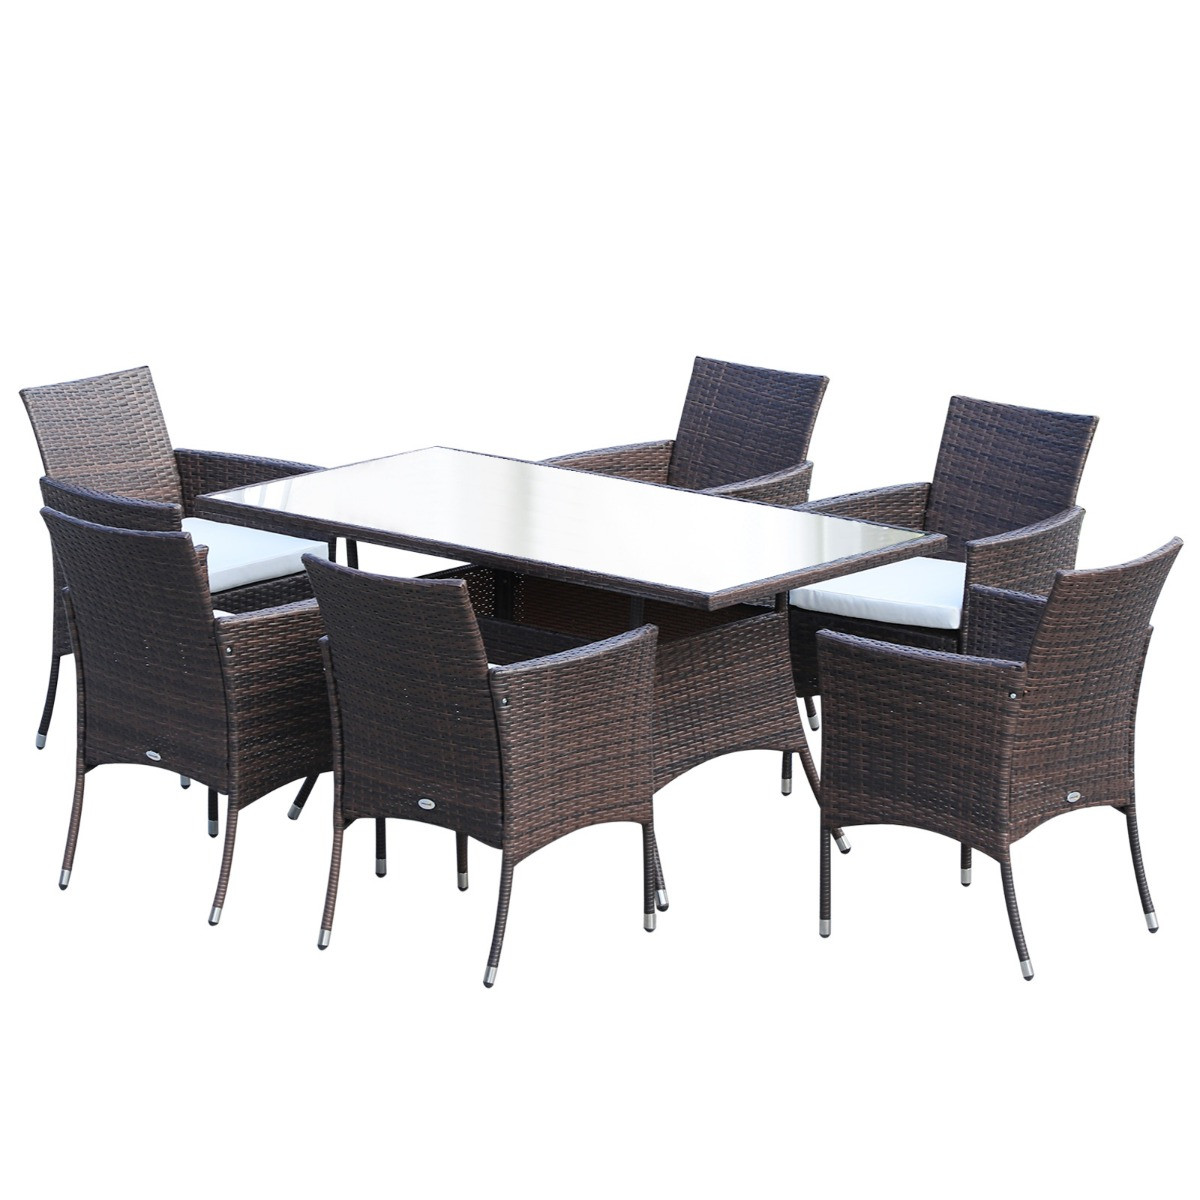 Outsunny Rattan Garden Furniture Dining Set, 7 Piece - Brown>